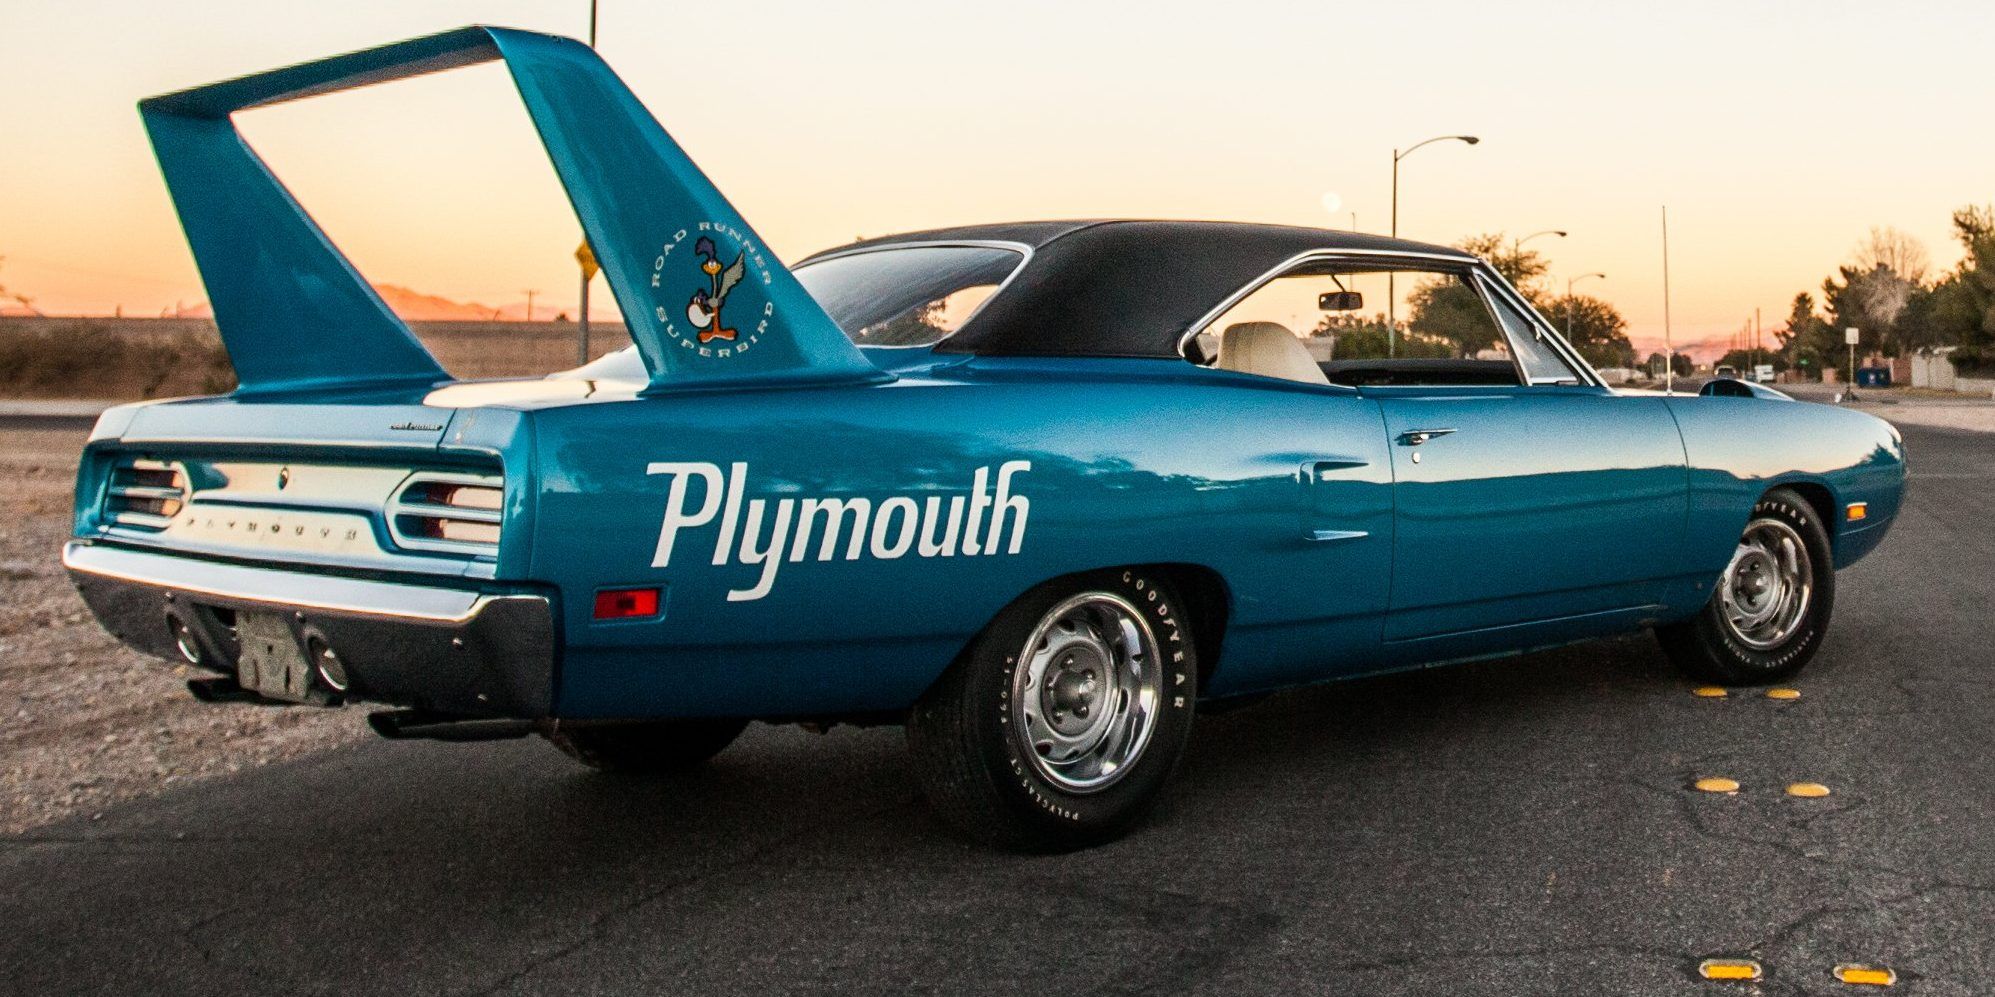 1970 Plymouth Superbird Classic wing tail